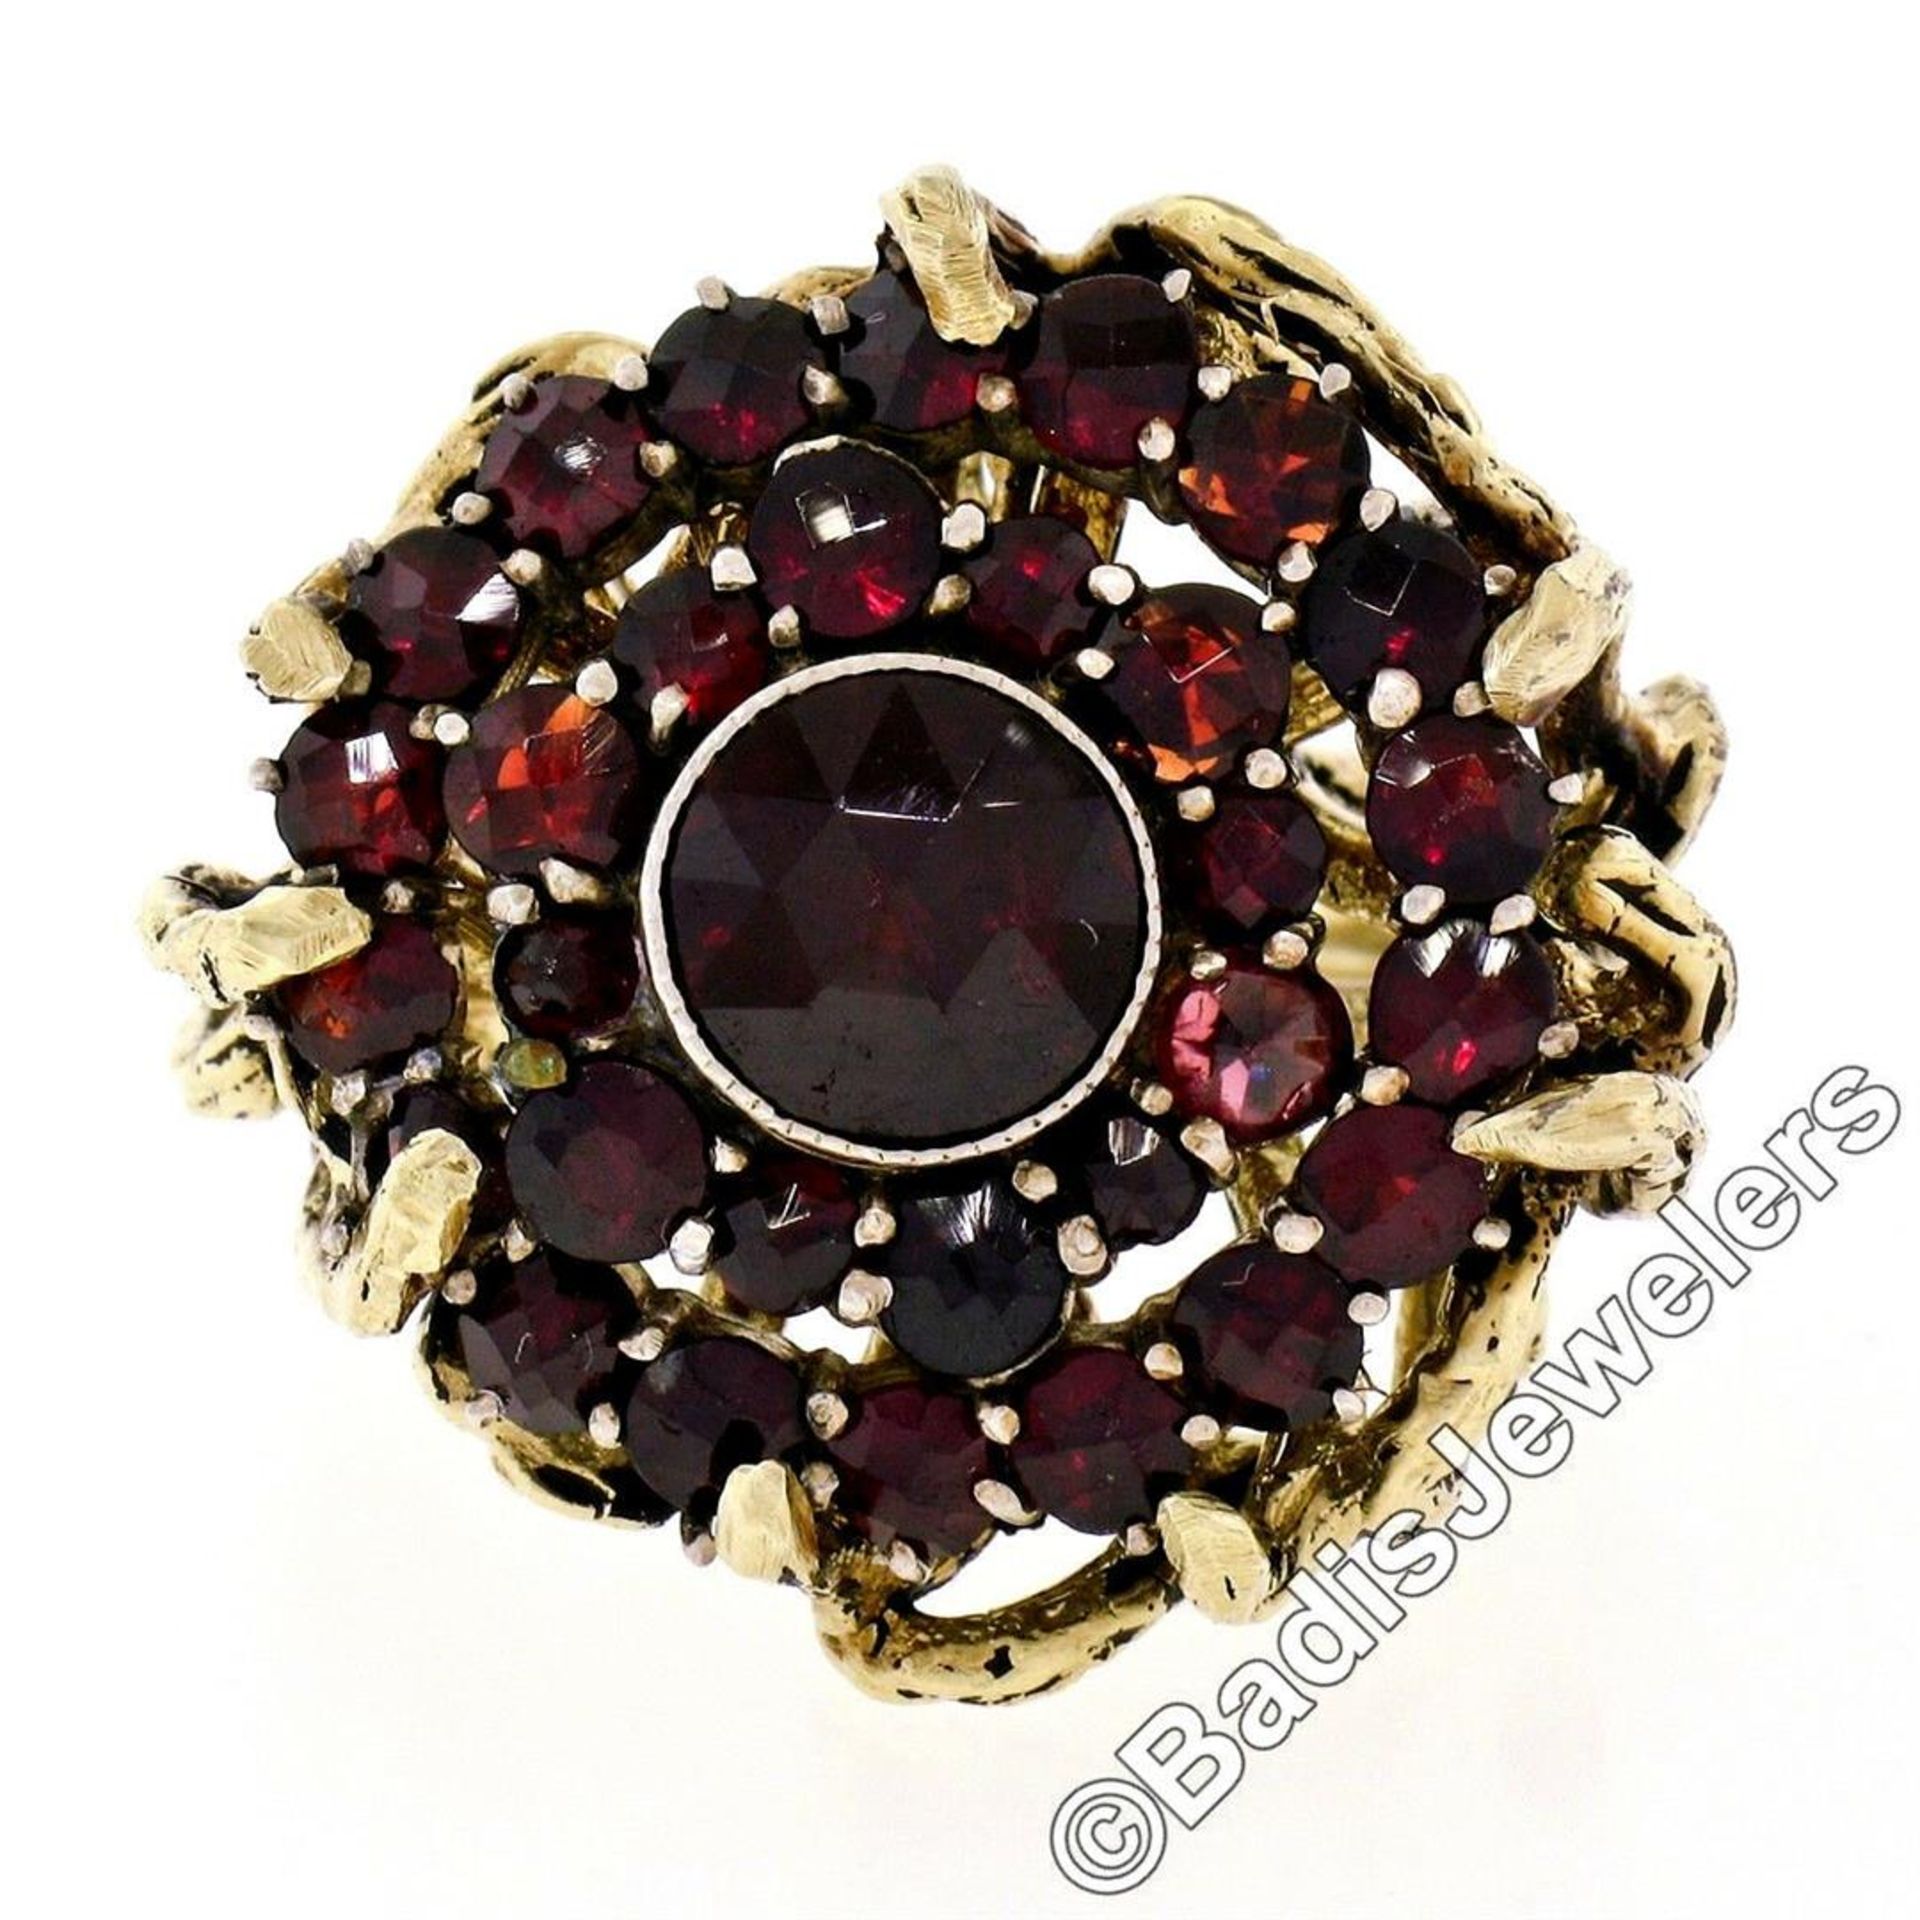 Vintage 14kt Yellow Gold and Silver Top Old Cut Garnet Cluster Ring